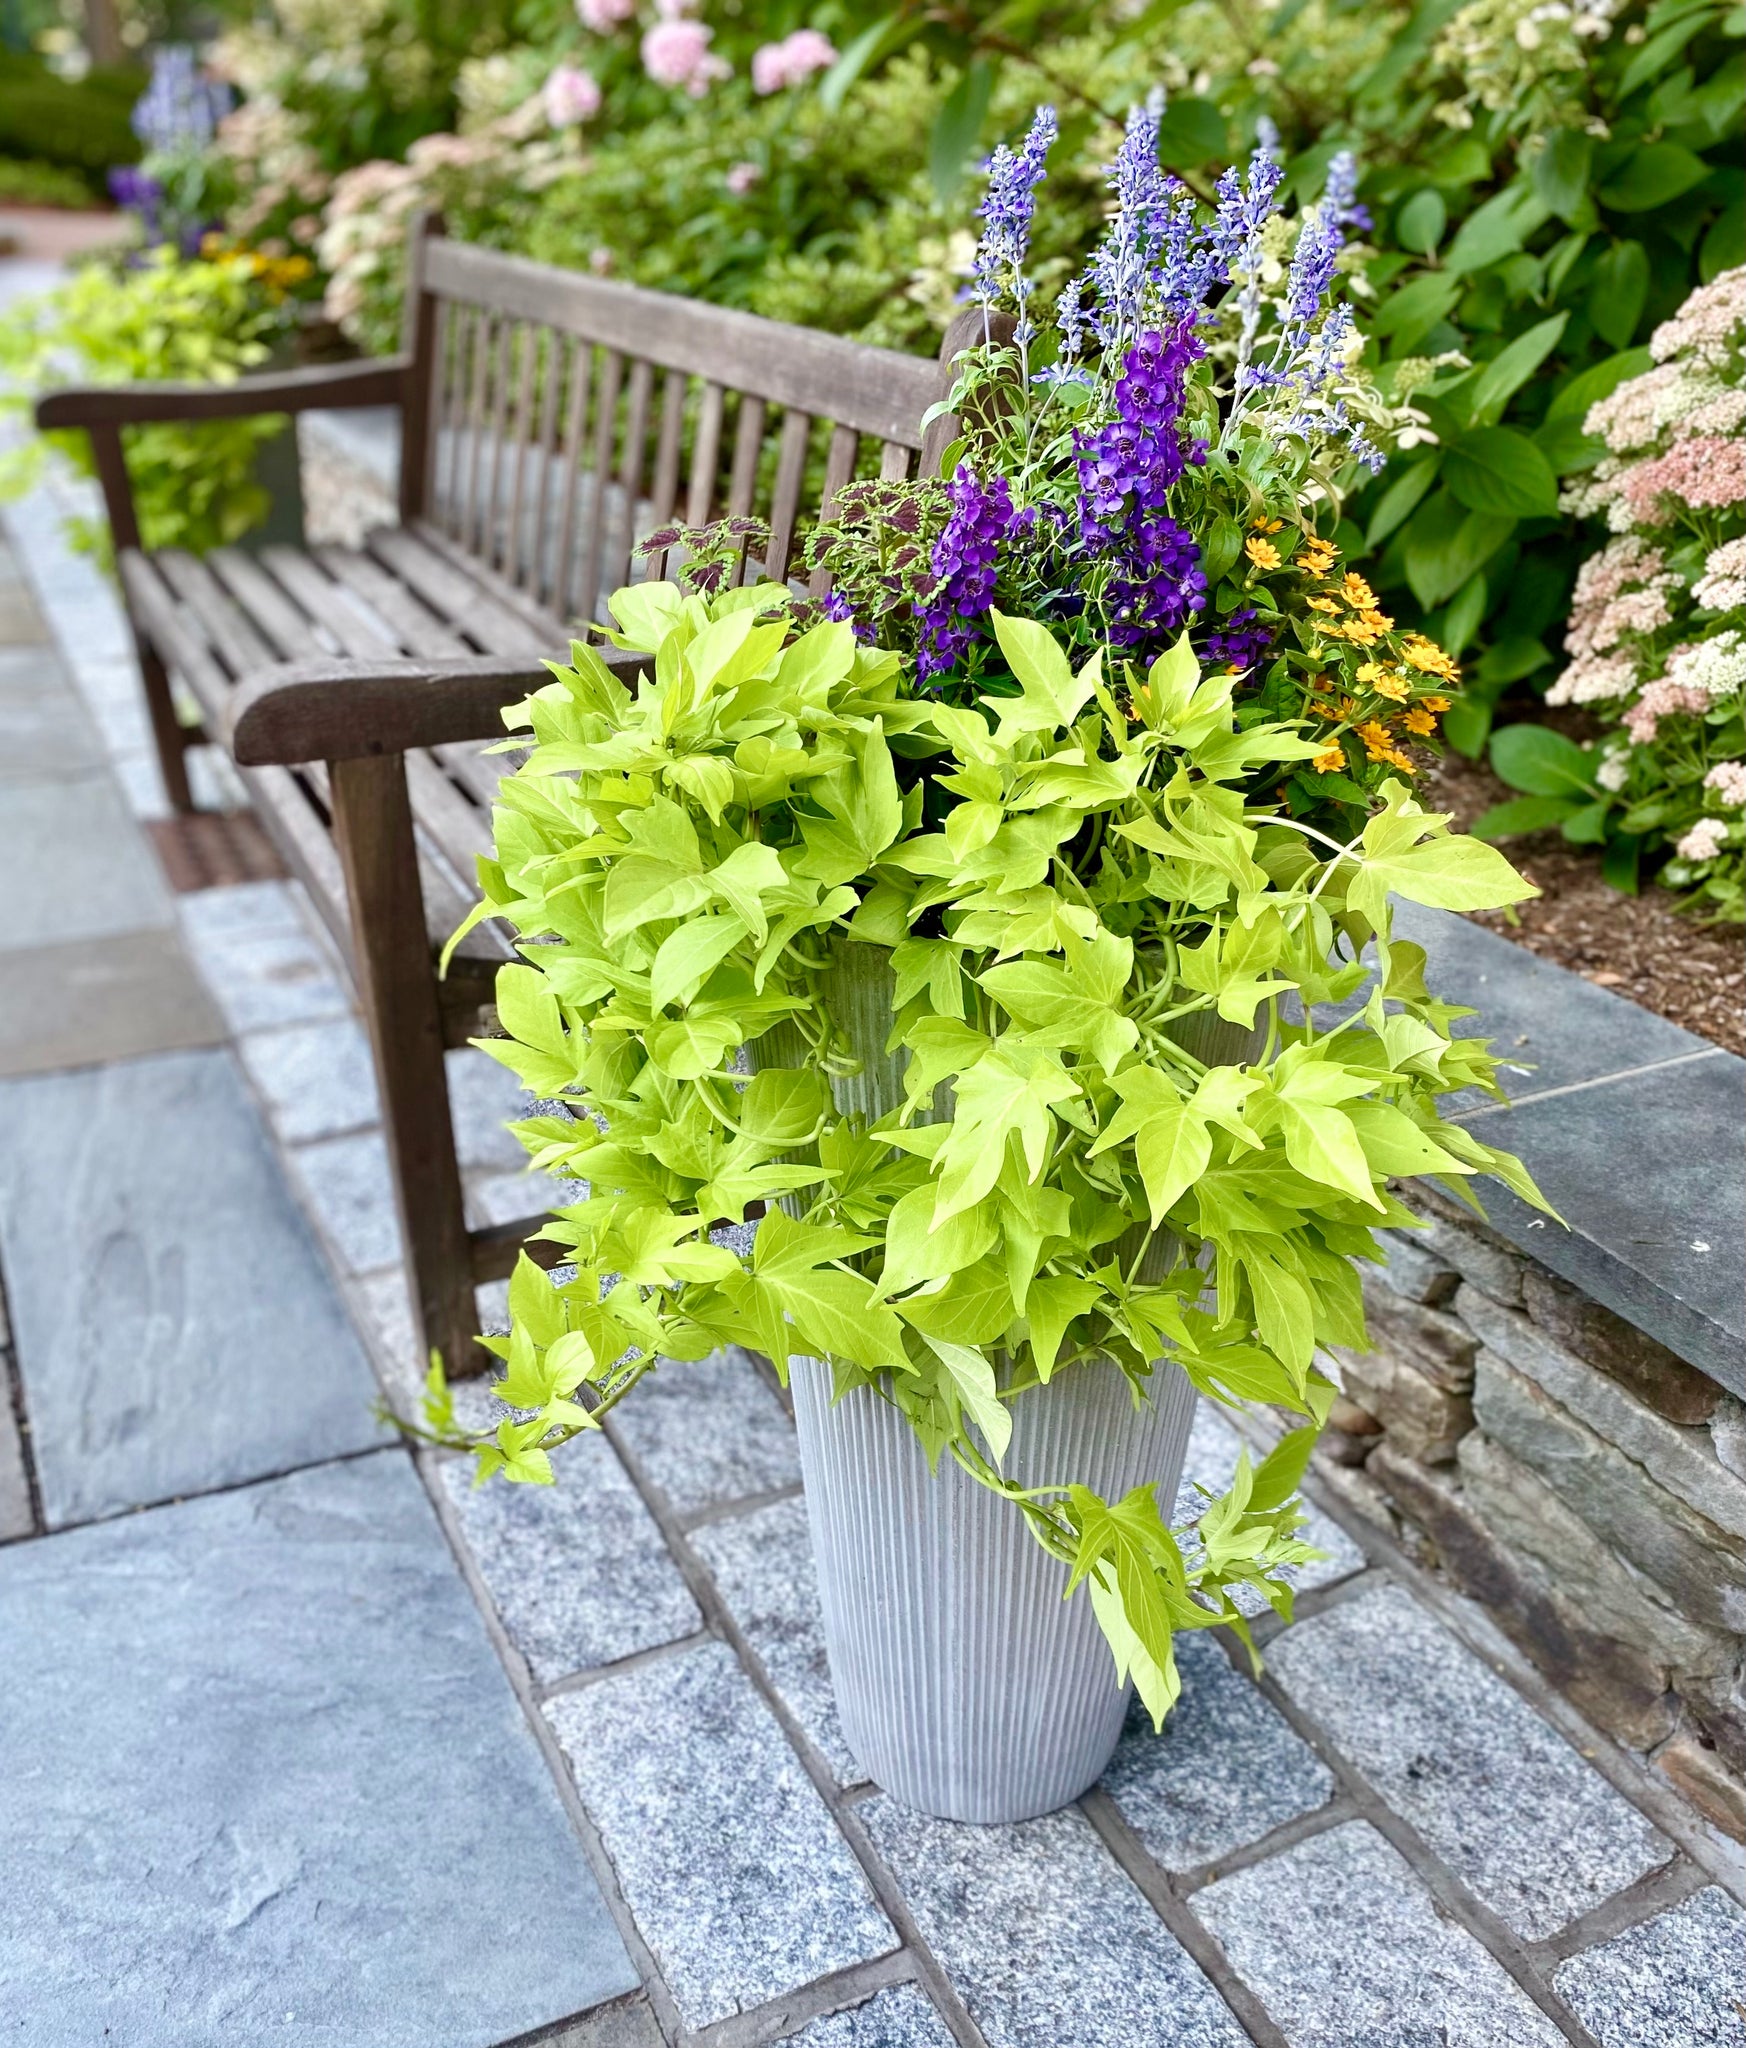 Wooden garden bench flanked by fluted concrete pedestal planters filled with blue, purple, and yellow flowers surrounded by hanging green vines.